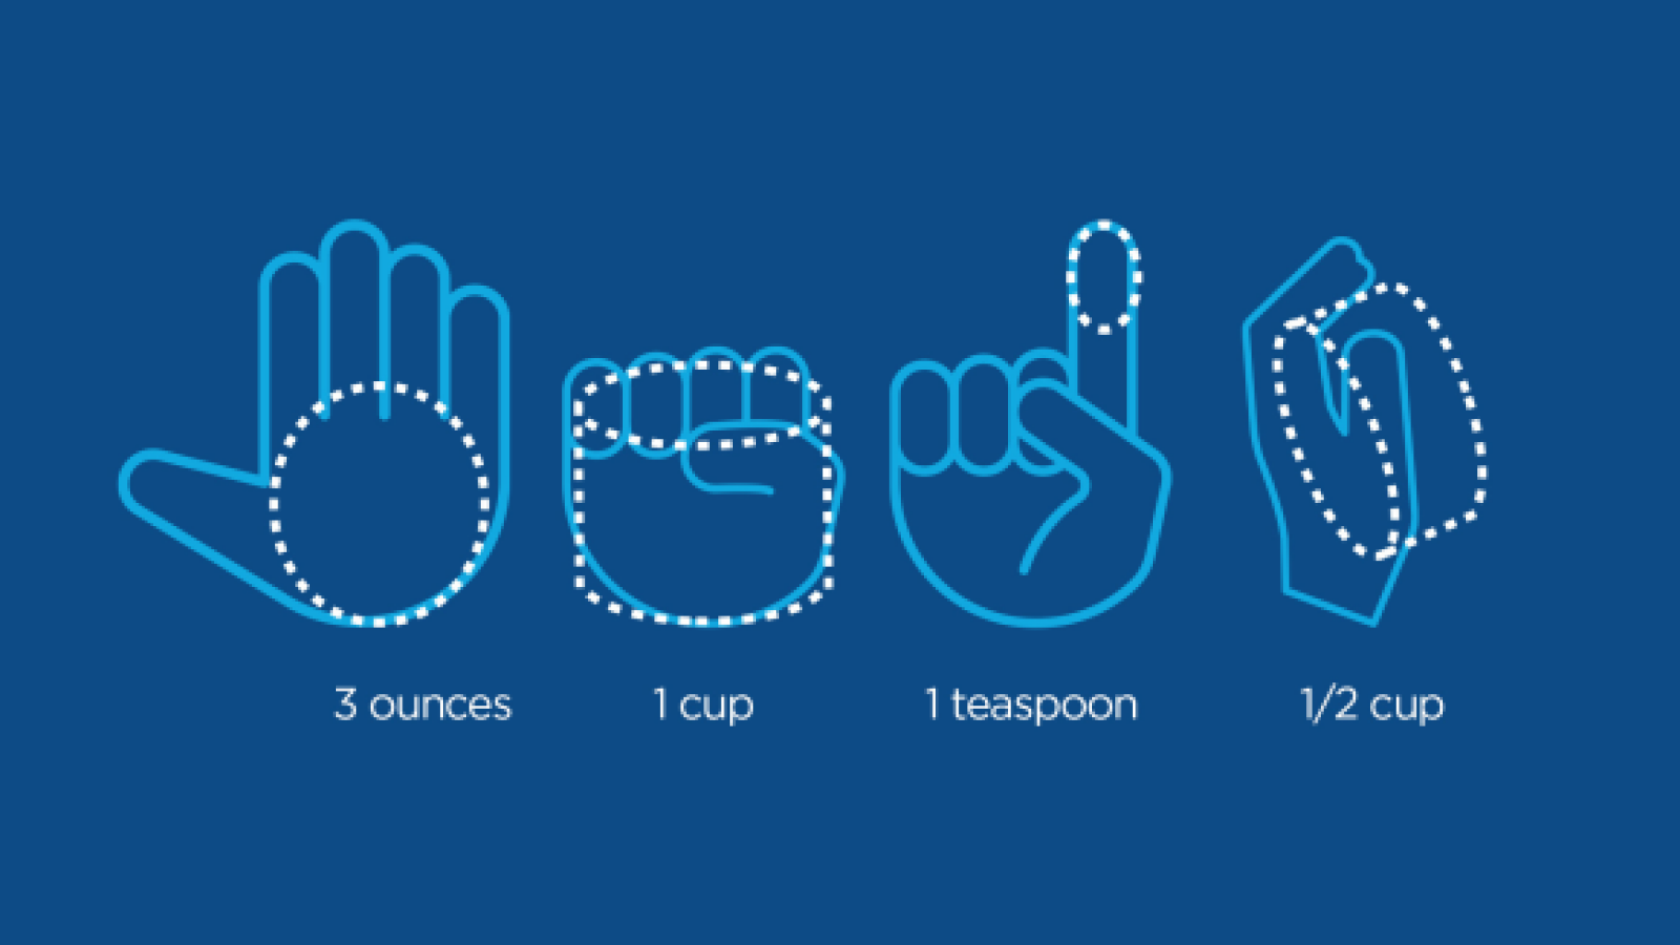 A hand is used to show measurements. The palm represents 3 ounces, the fist represents 1 cup, the fingertip represents 1 teaspoon, and the cupped hand represents one half cup.